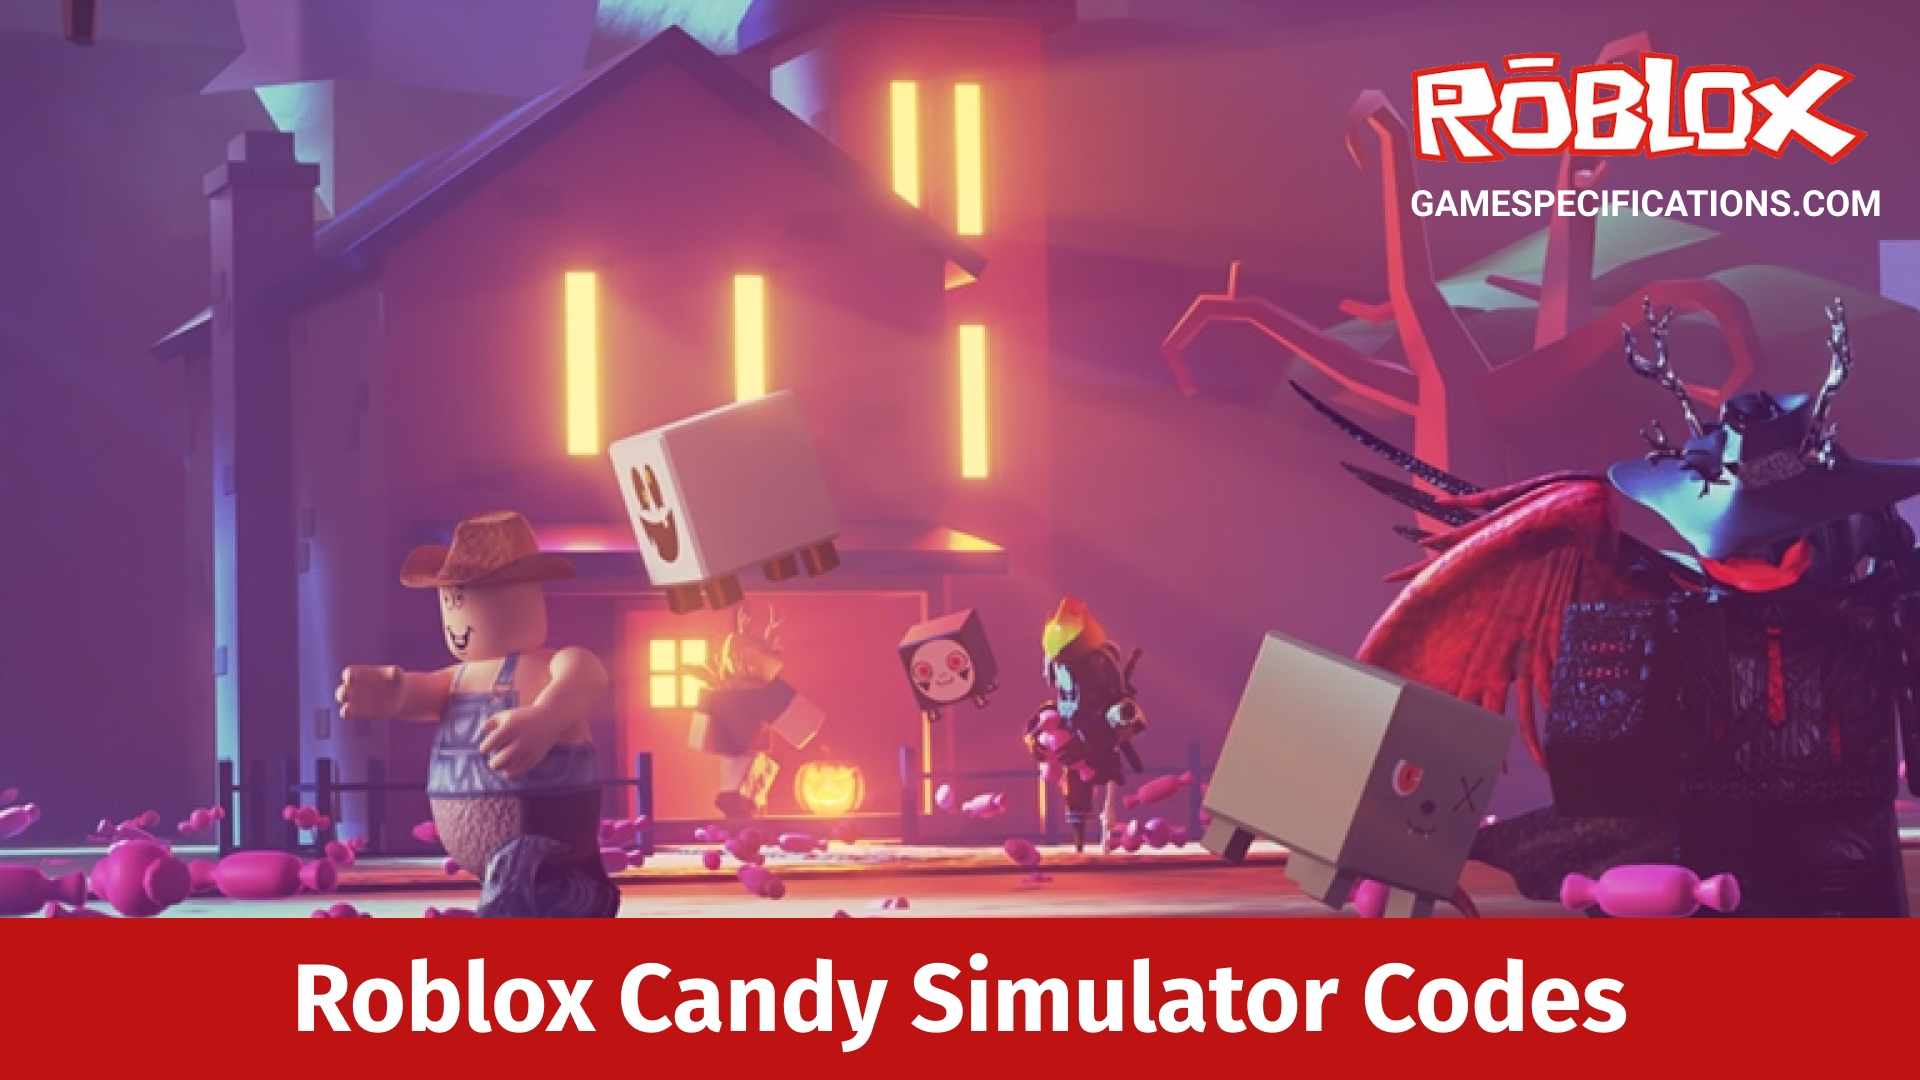 39 Working Roblox Candy Simulator Codes July 2021 Game Specifications - candy paint roblox code